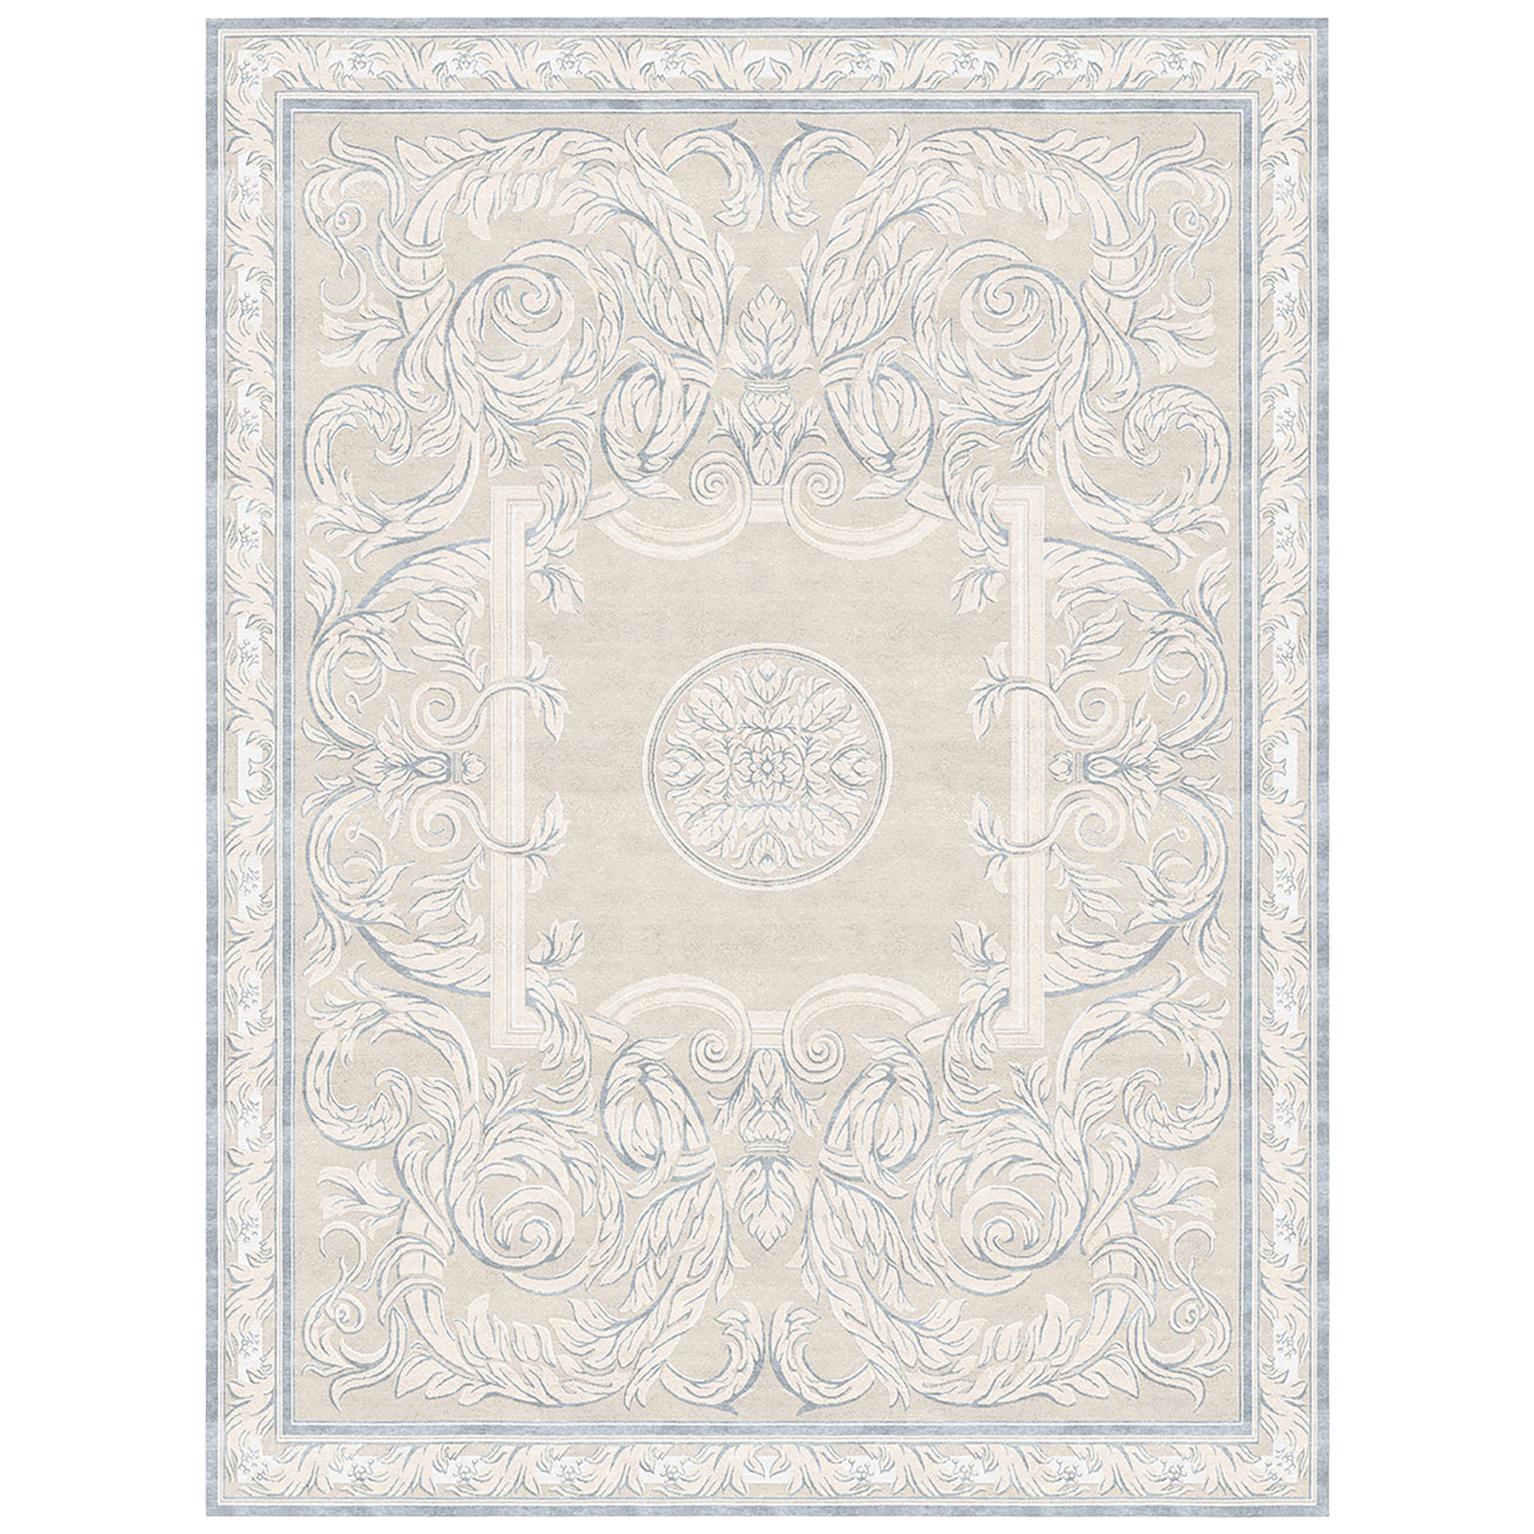 Floral pattern Modern Classics Rug - Aubusson Heraldy Antique White For Sale